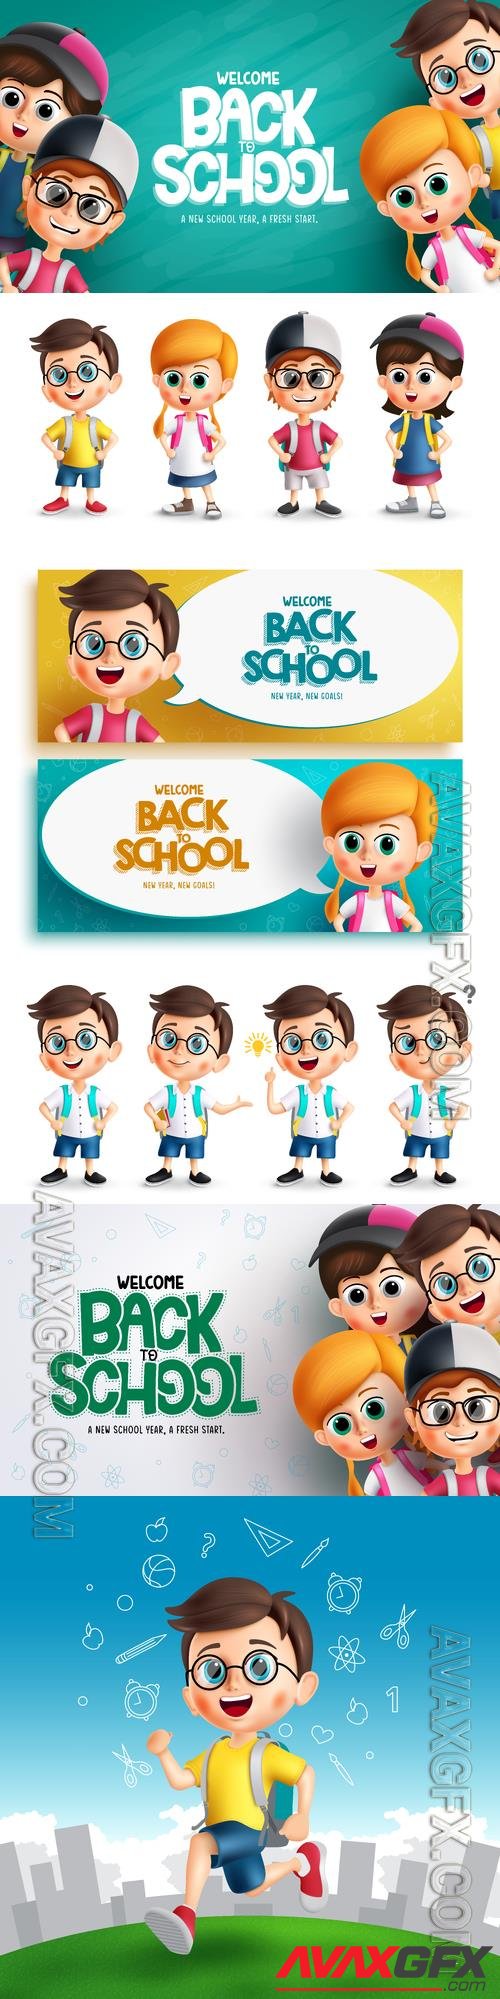 Vector back to school, school text with student characters in chalkboard element